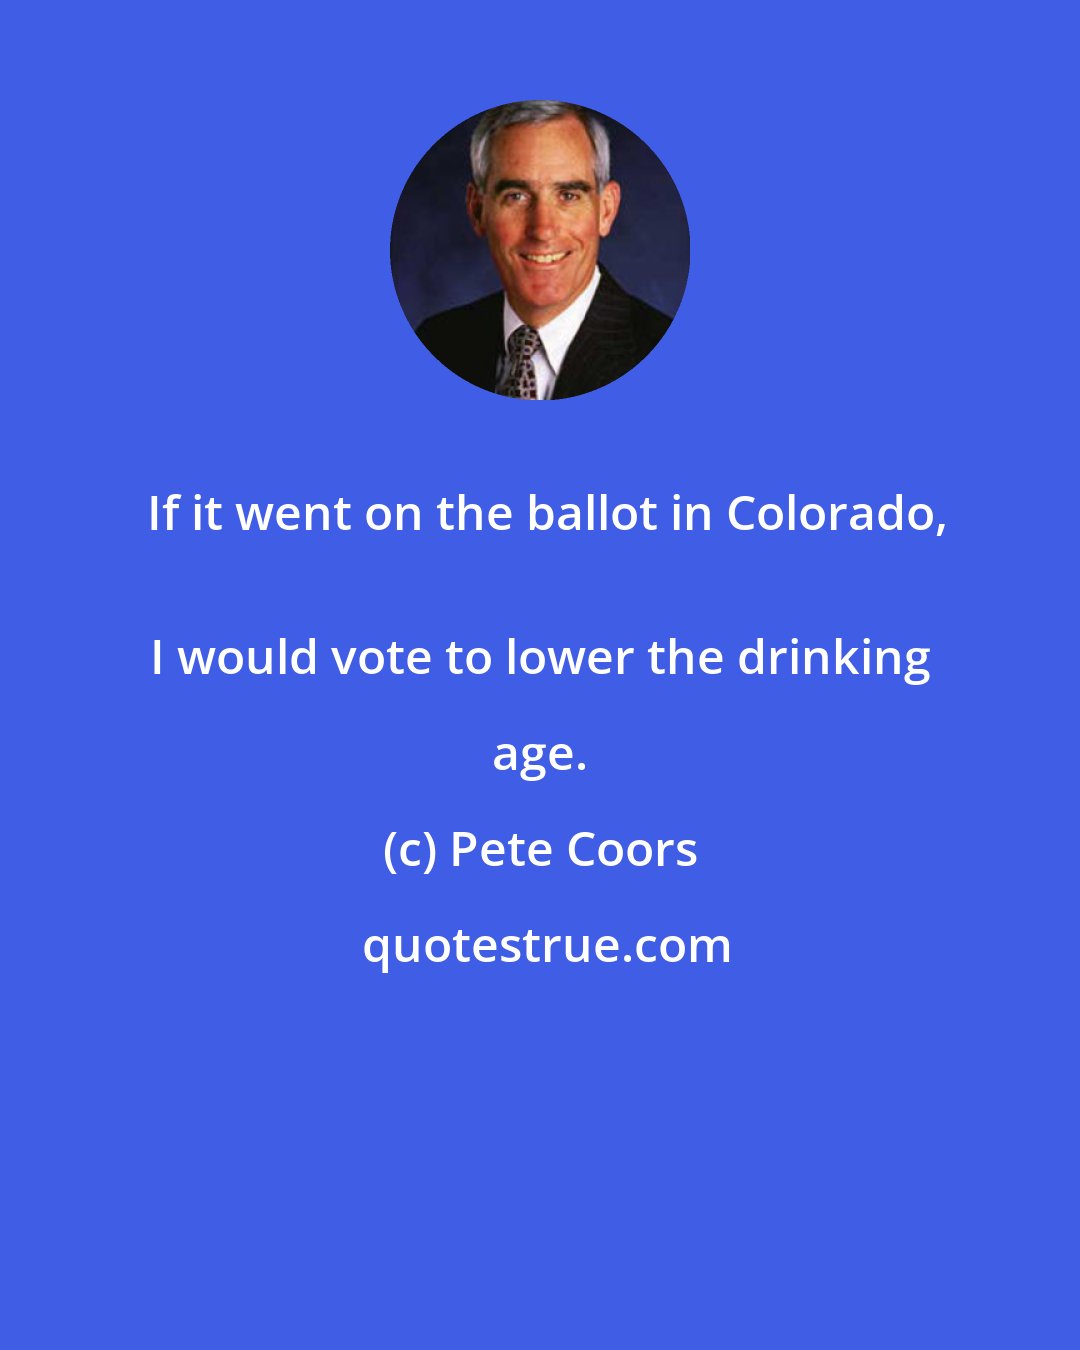 Pete Coors: If it went on the ballot in Colorado,
 I would vote to lower the drinking age.